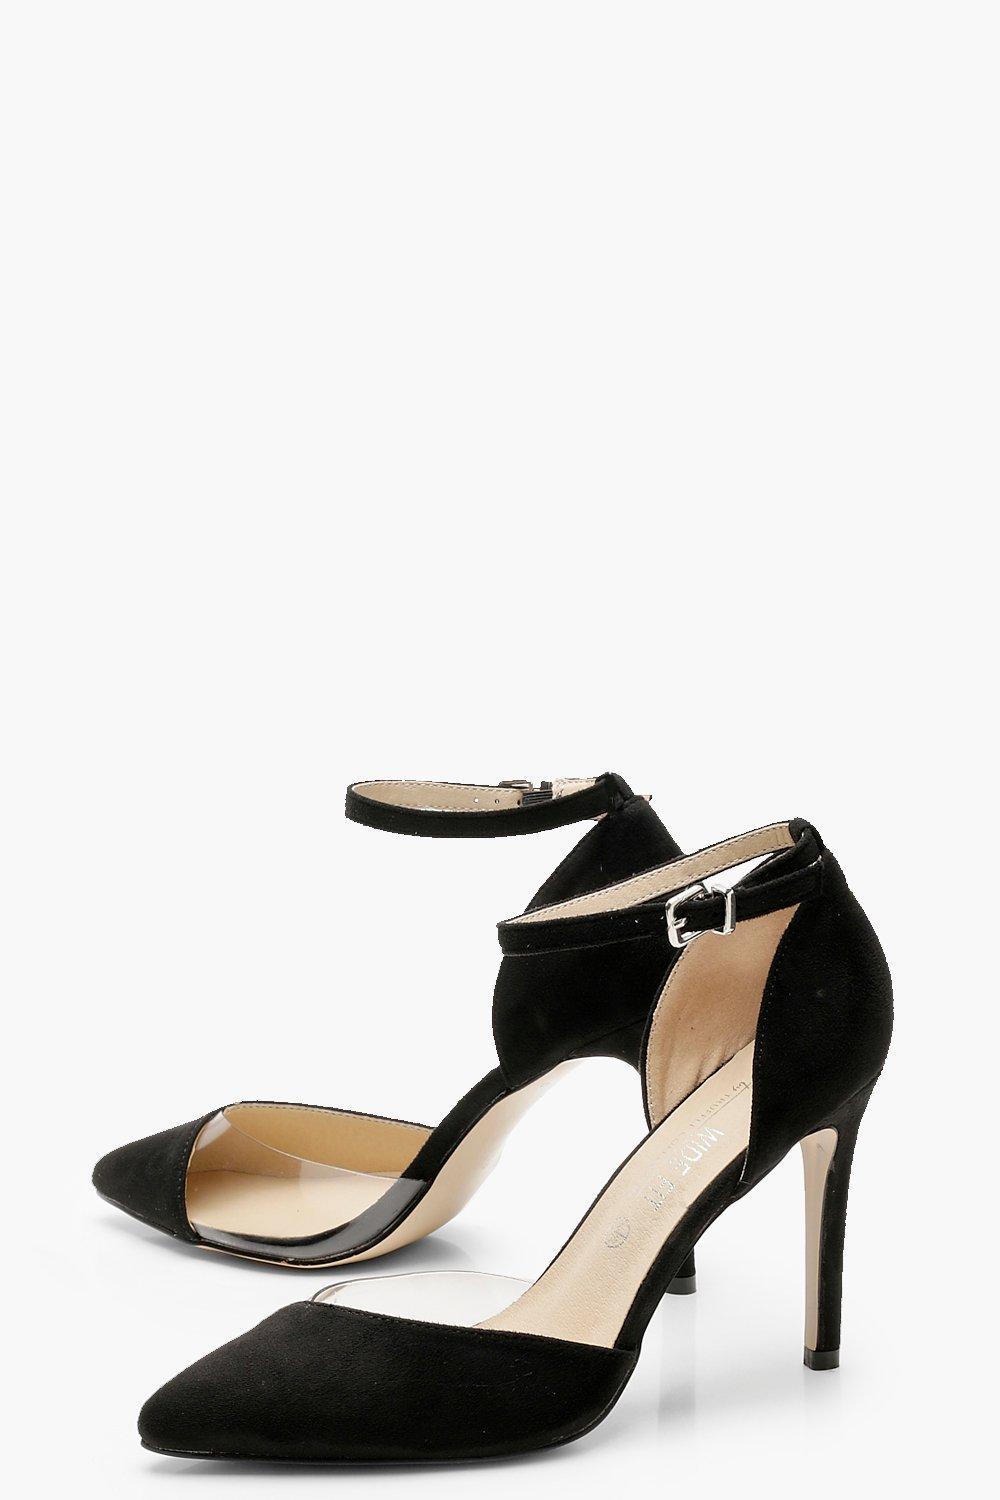 Boohoo Wide Fit Clear Pointed Court Shoes in Black - Lyst